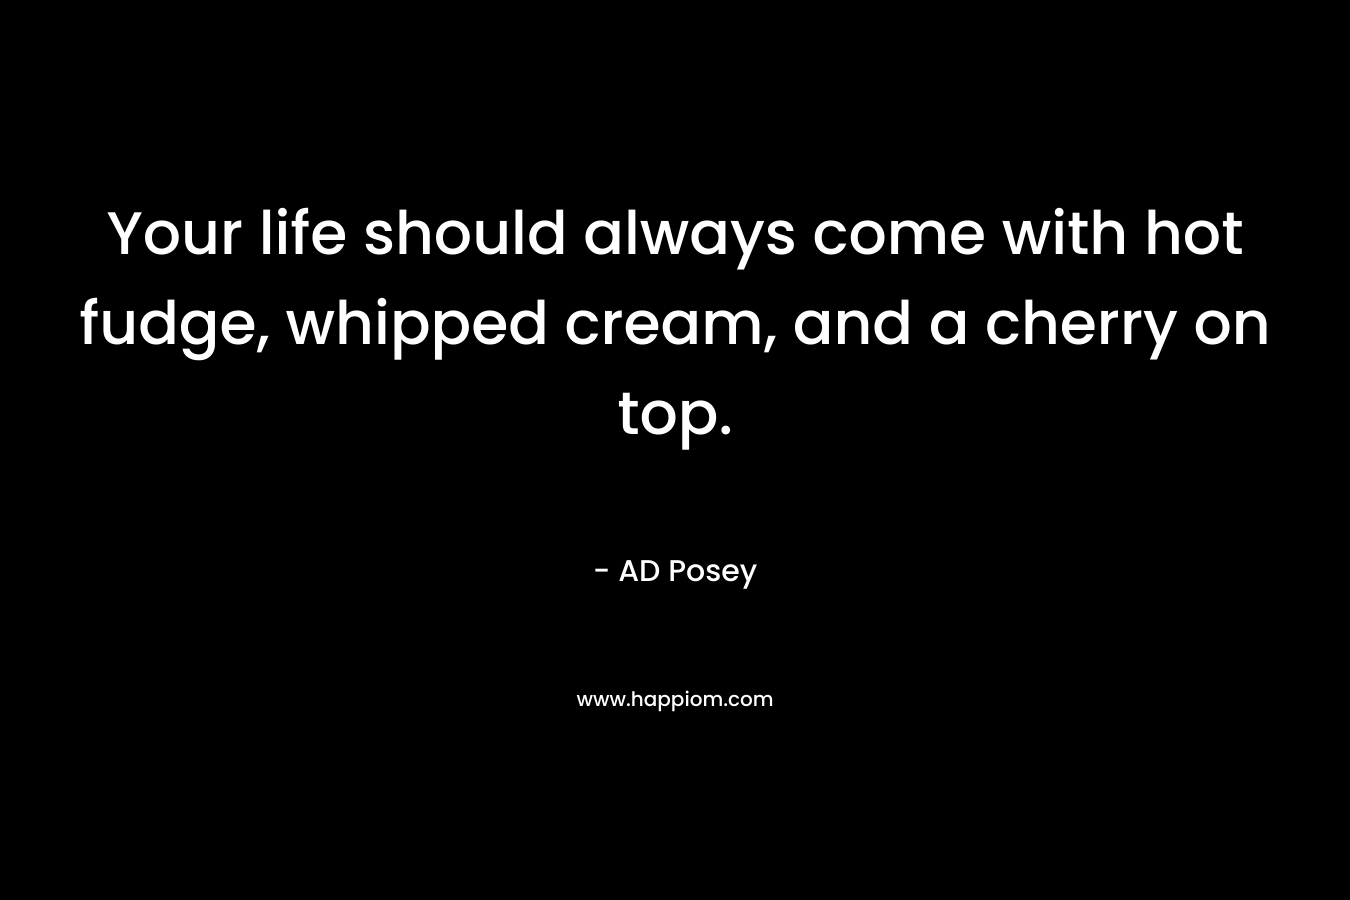 Your life should always come with hot fudge, whipped cream, and a cherry on top.